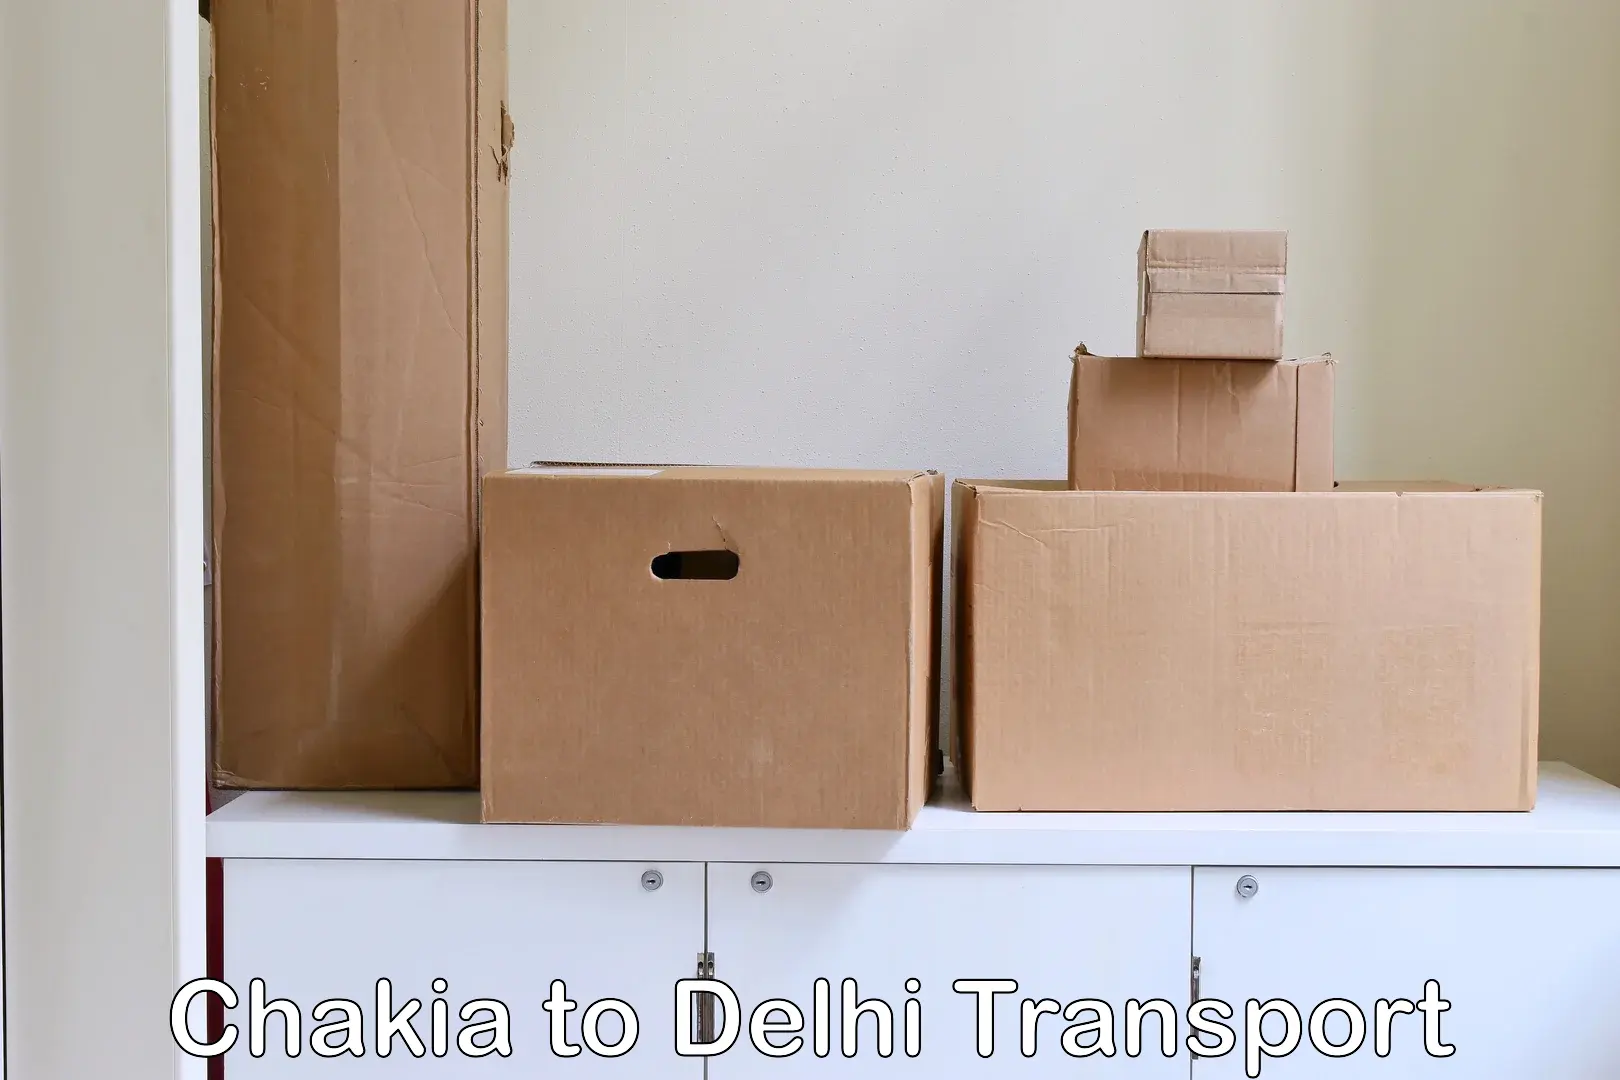 Daily parcel service transport in Chakia to East Delhi